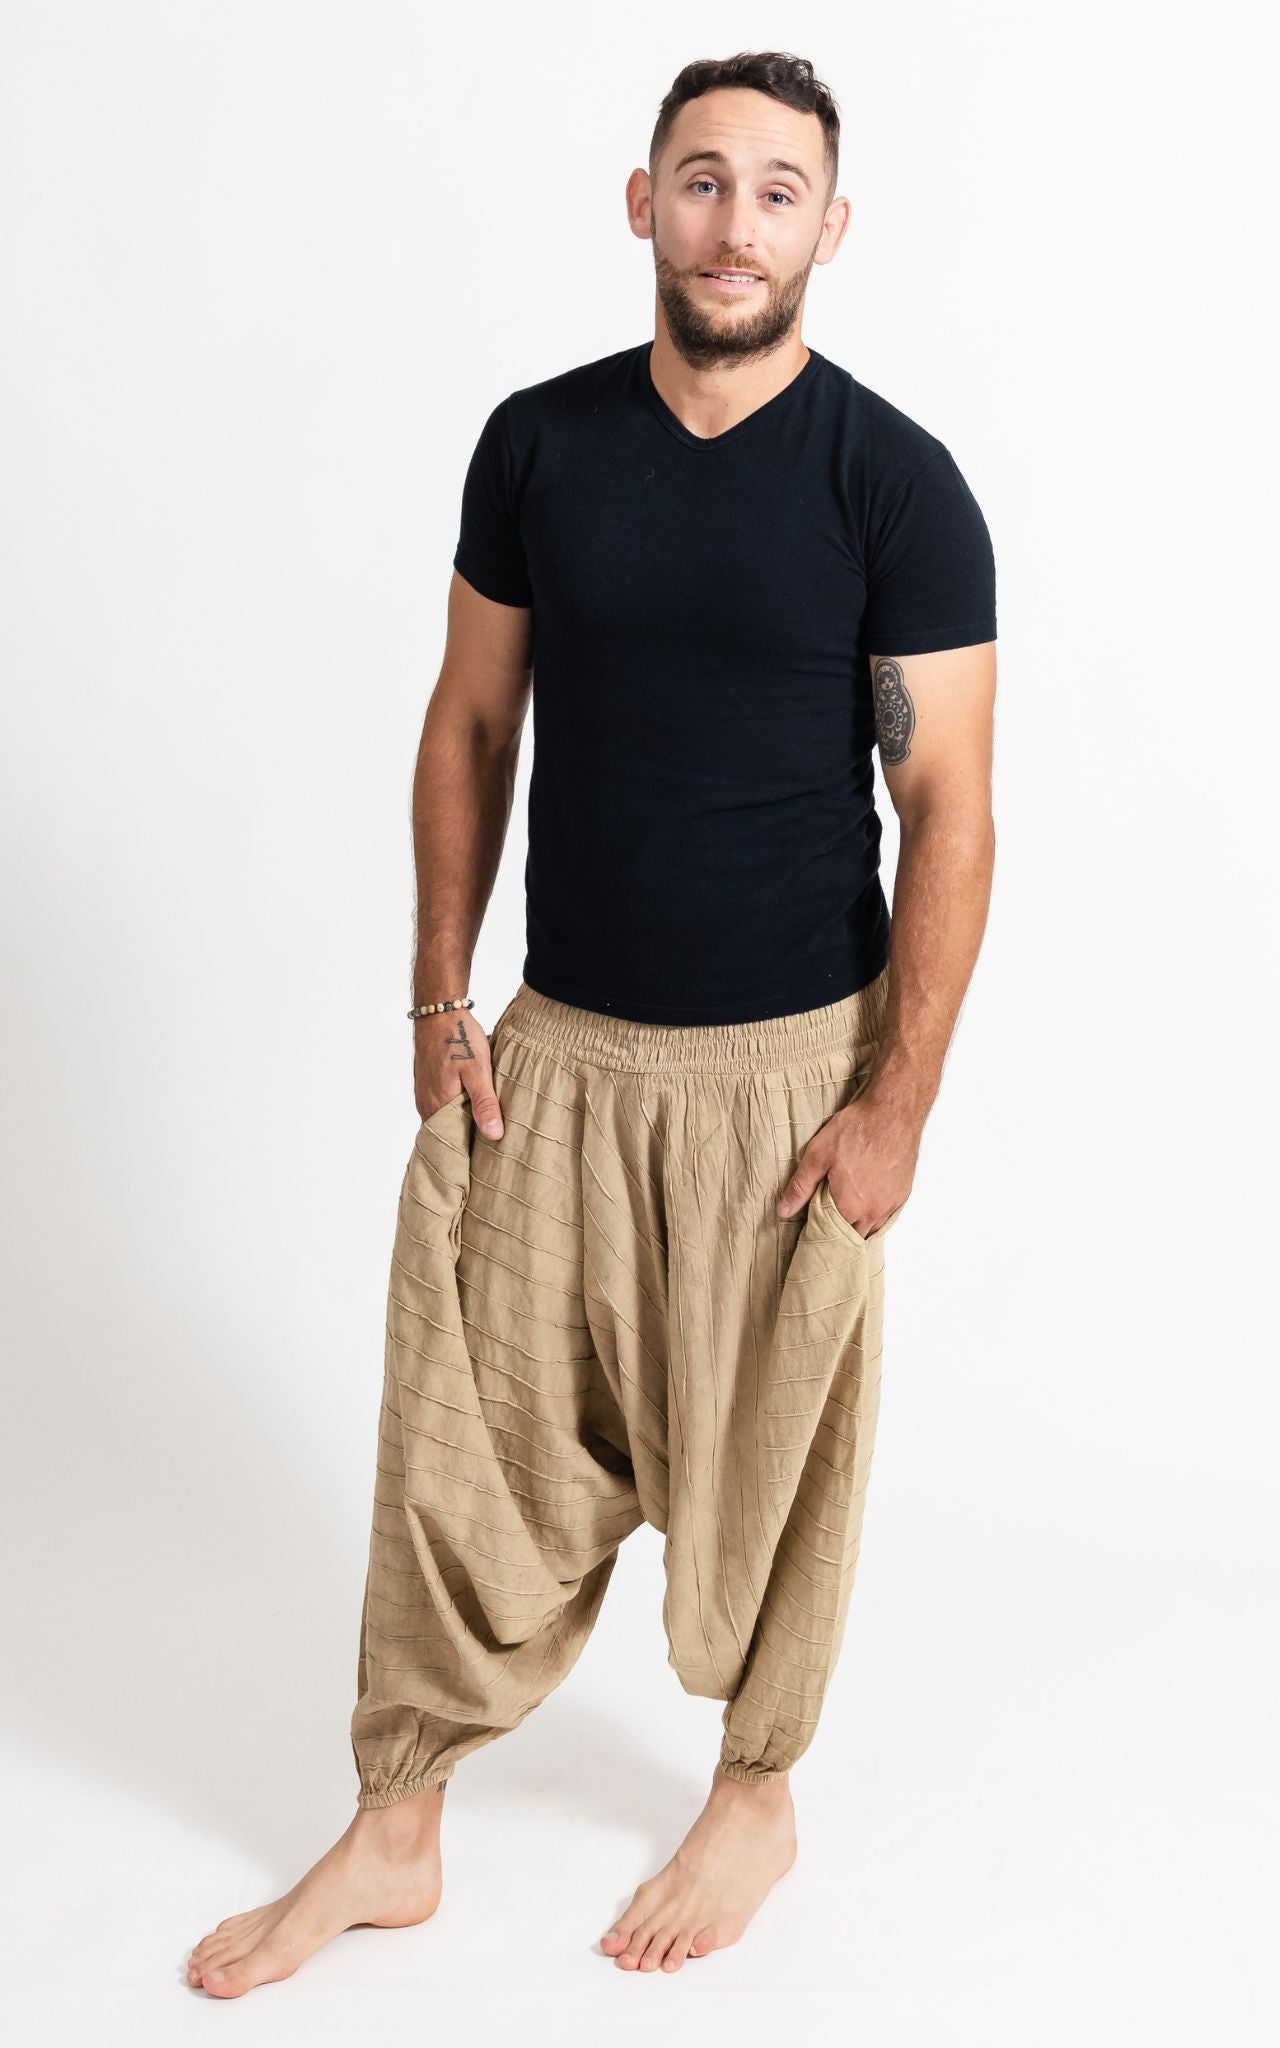 Surya Australia Earthy Cotton Aladdin Pants for men from Nepal - Natural